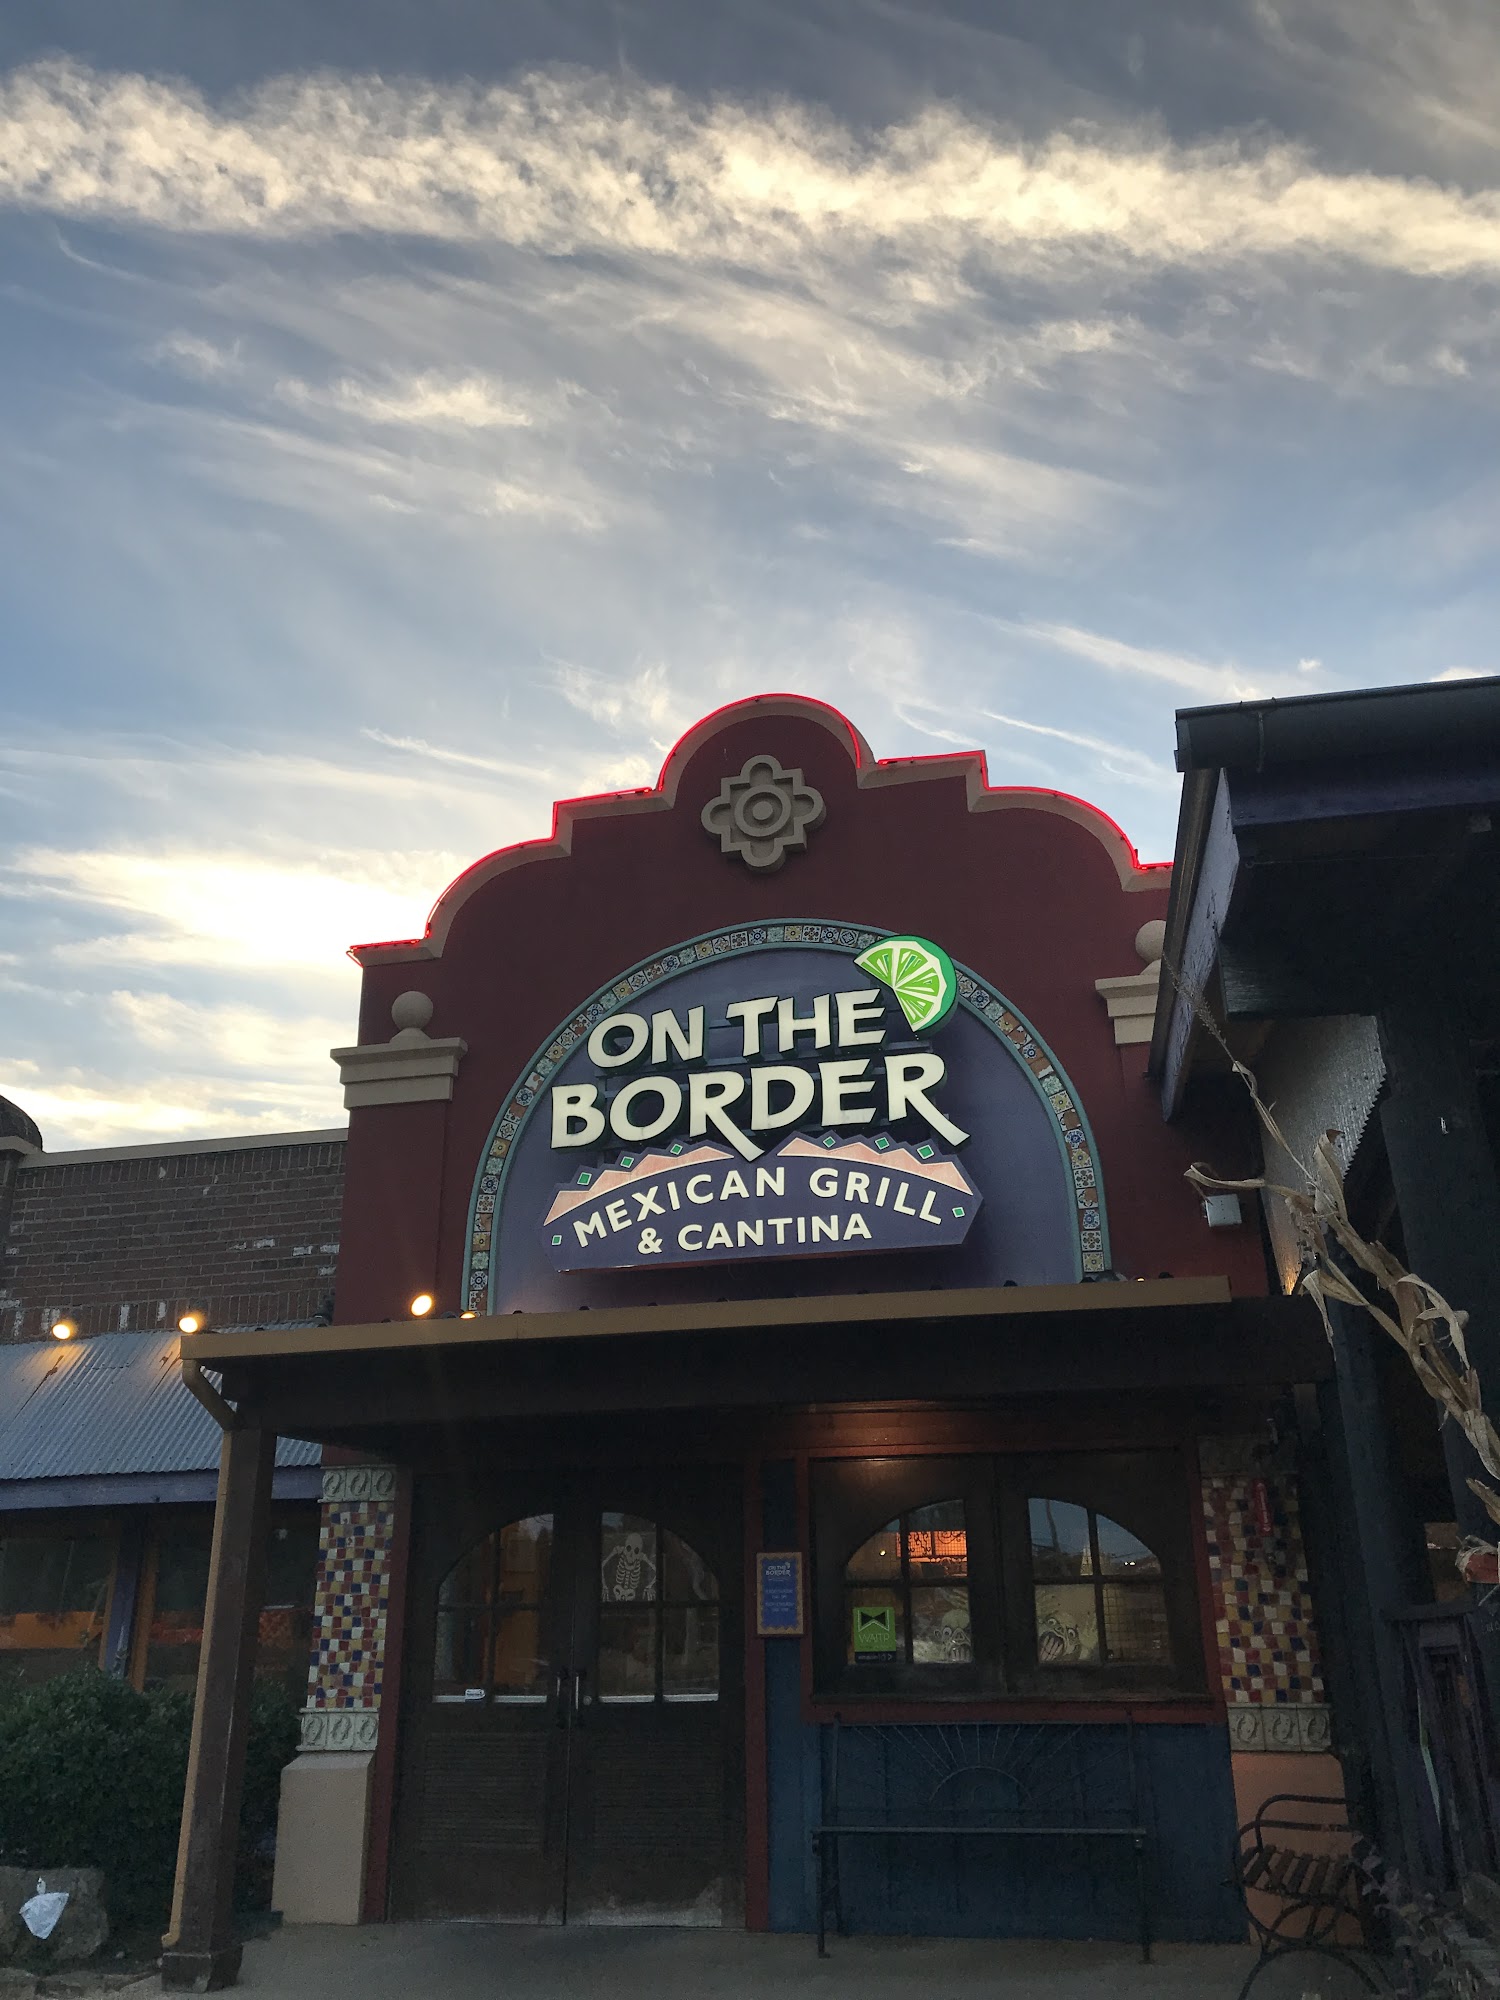 On The Border Mexican Grill & Cantina - Wolfchase